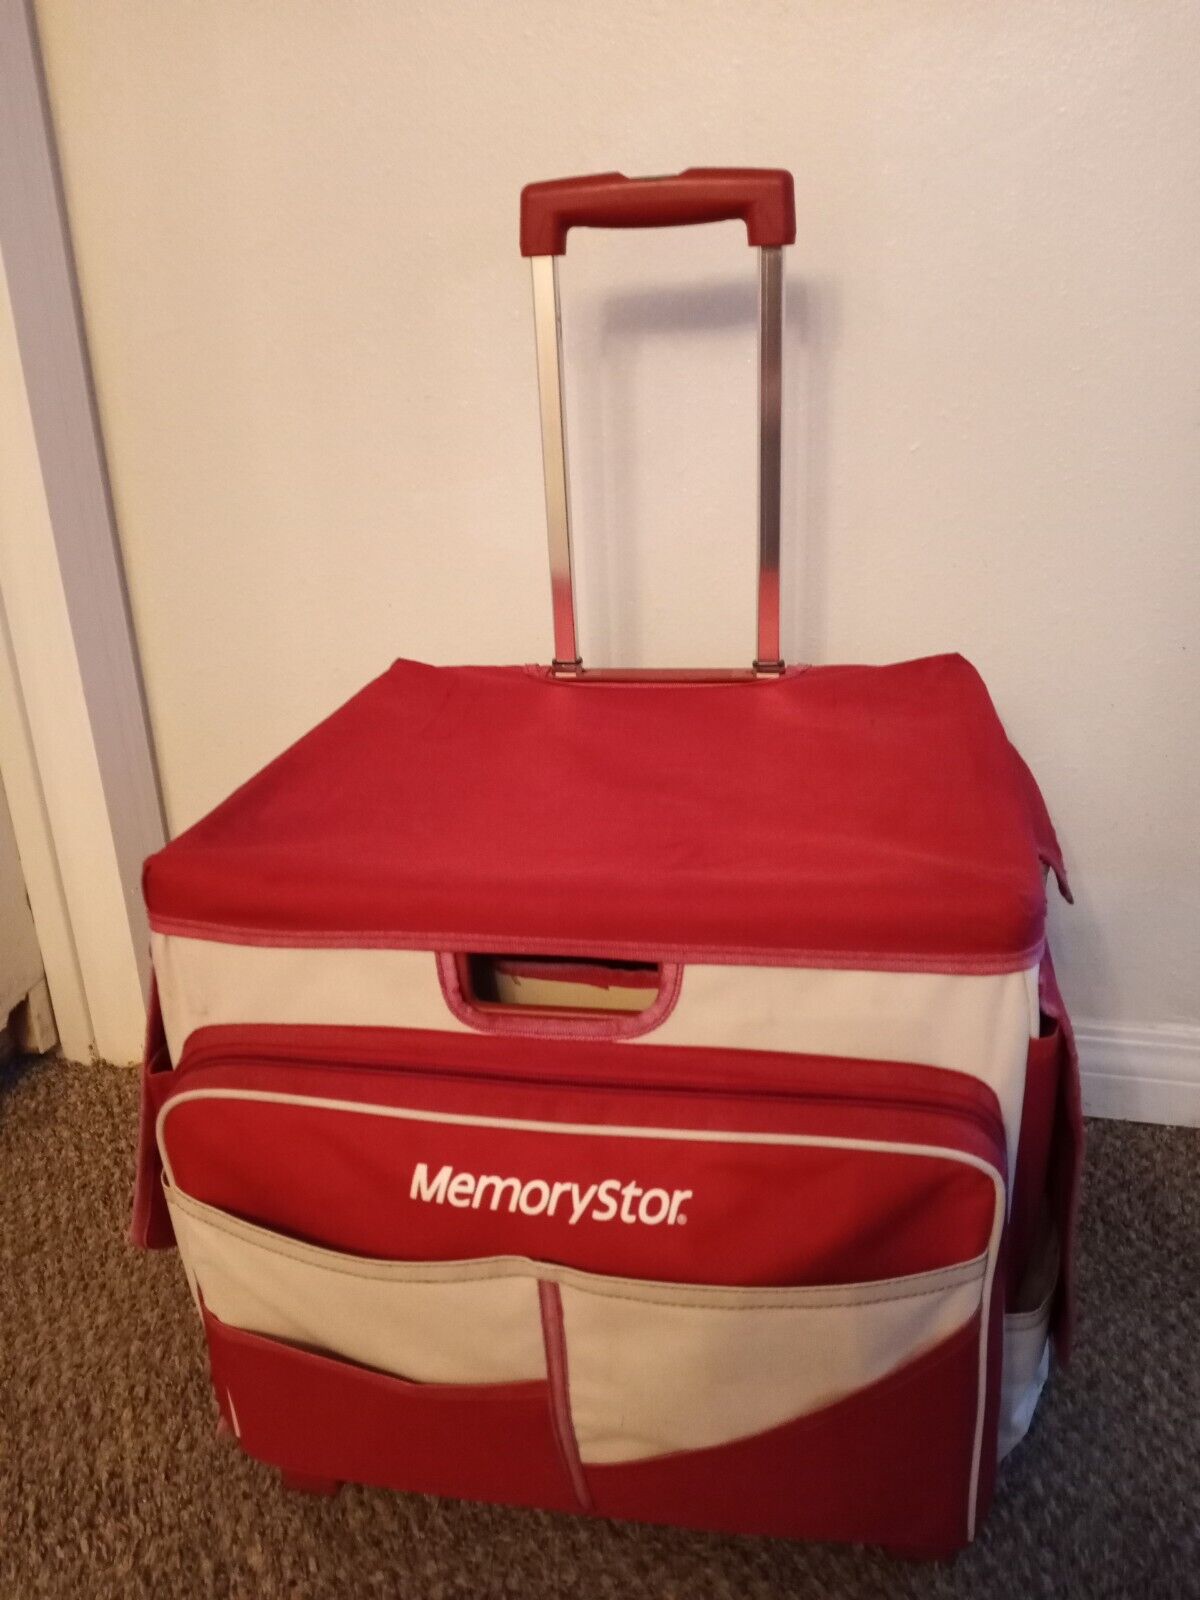 Memorystor Red Universal Rolling Cart W/ Sectional Organizer Crafts Scrapbooking